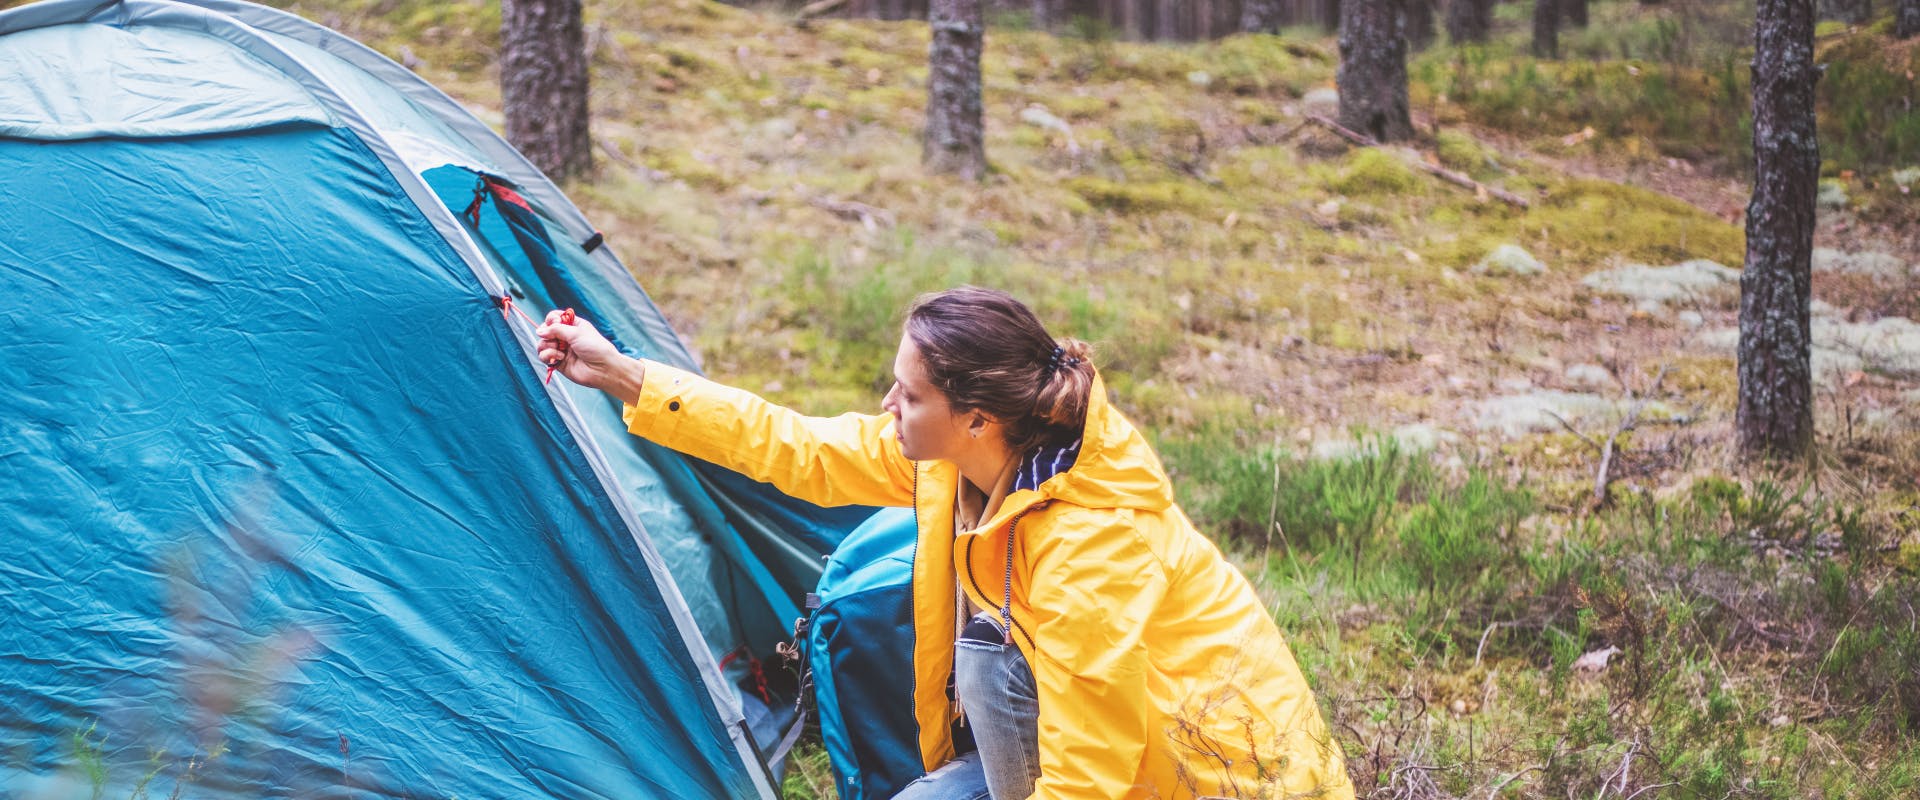 solo female traveler zipping up her solo camping tent